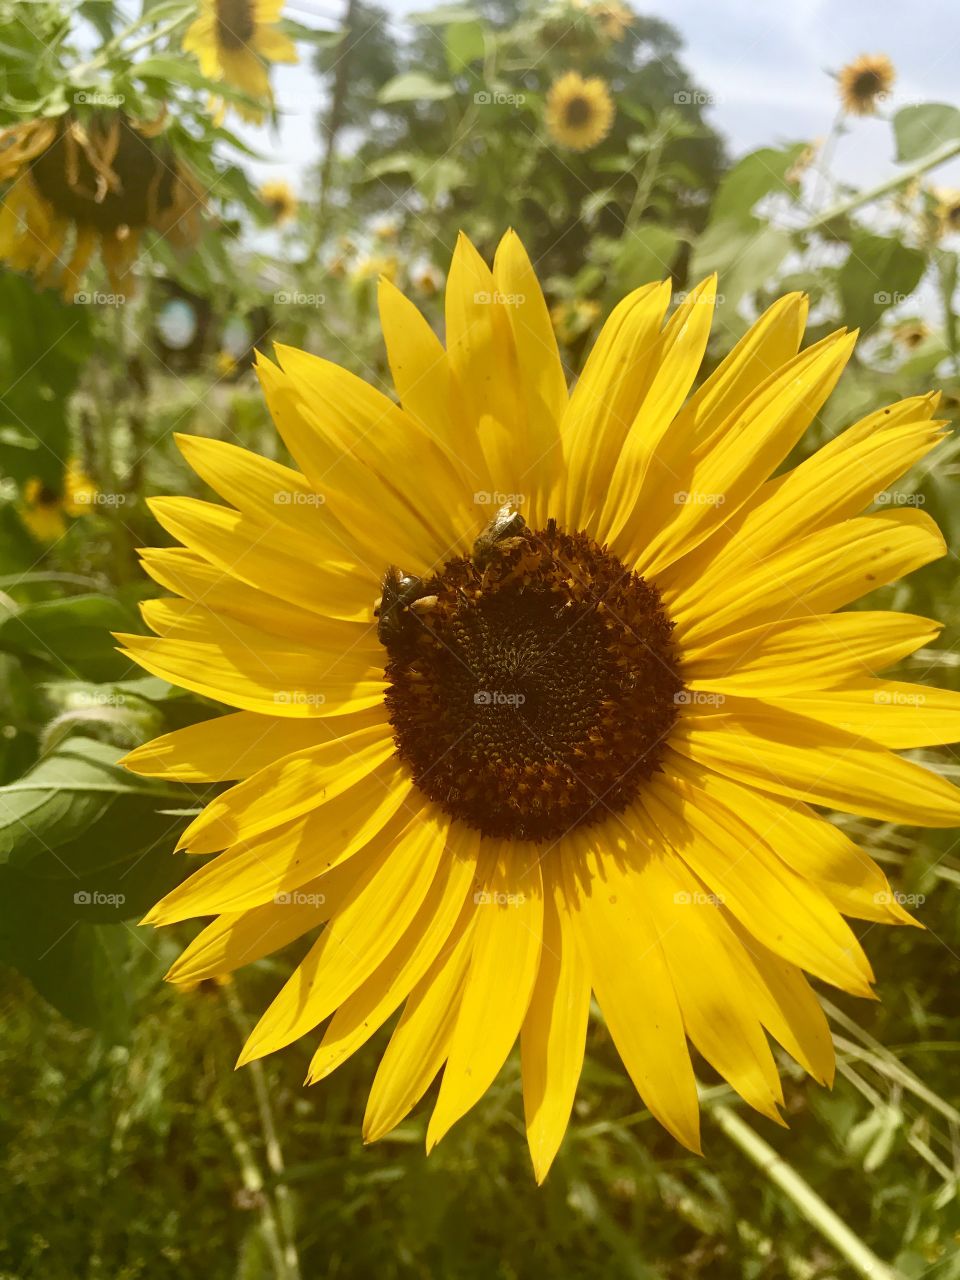 Sunflowers with Bumble Bees